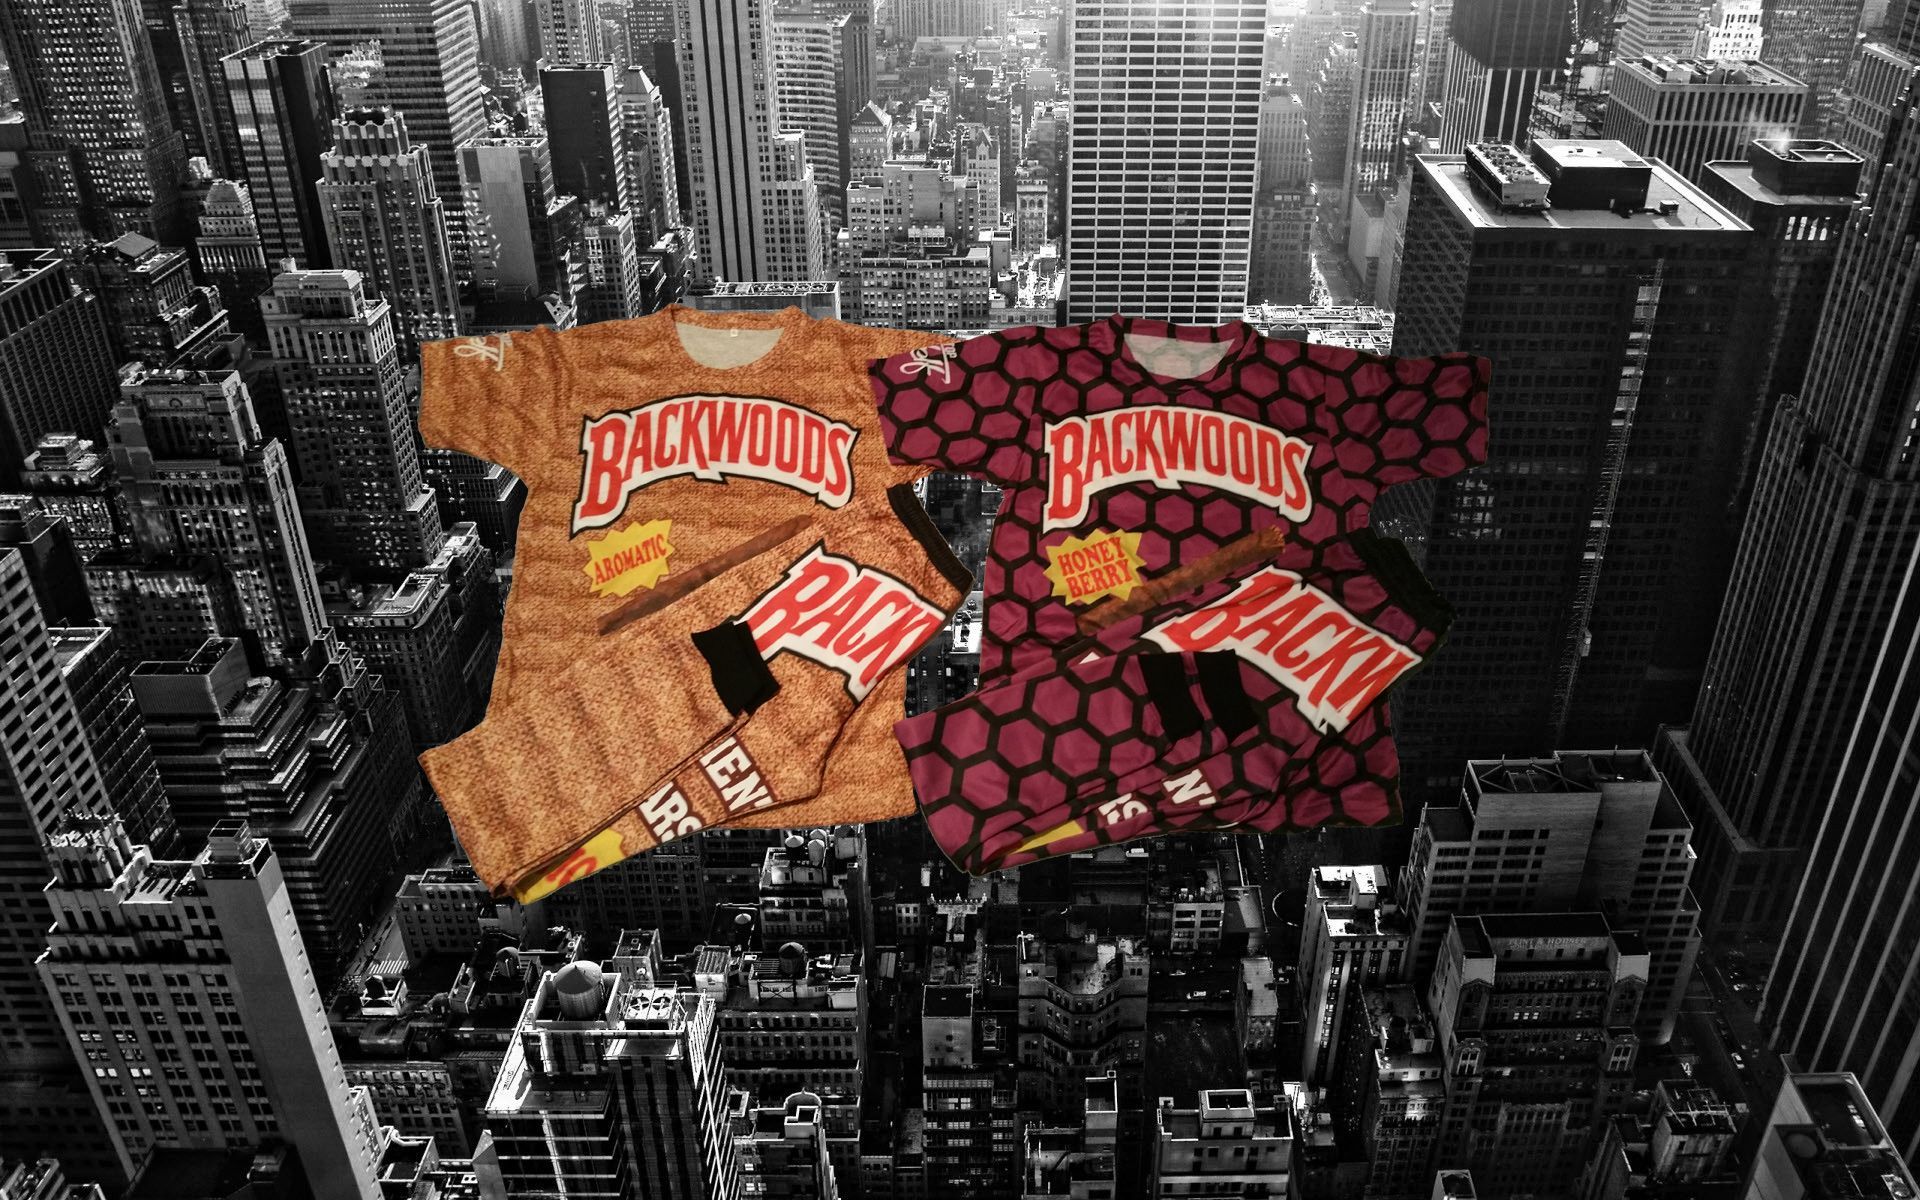 Get your Backwoods gear today Add us